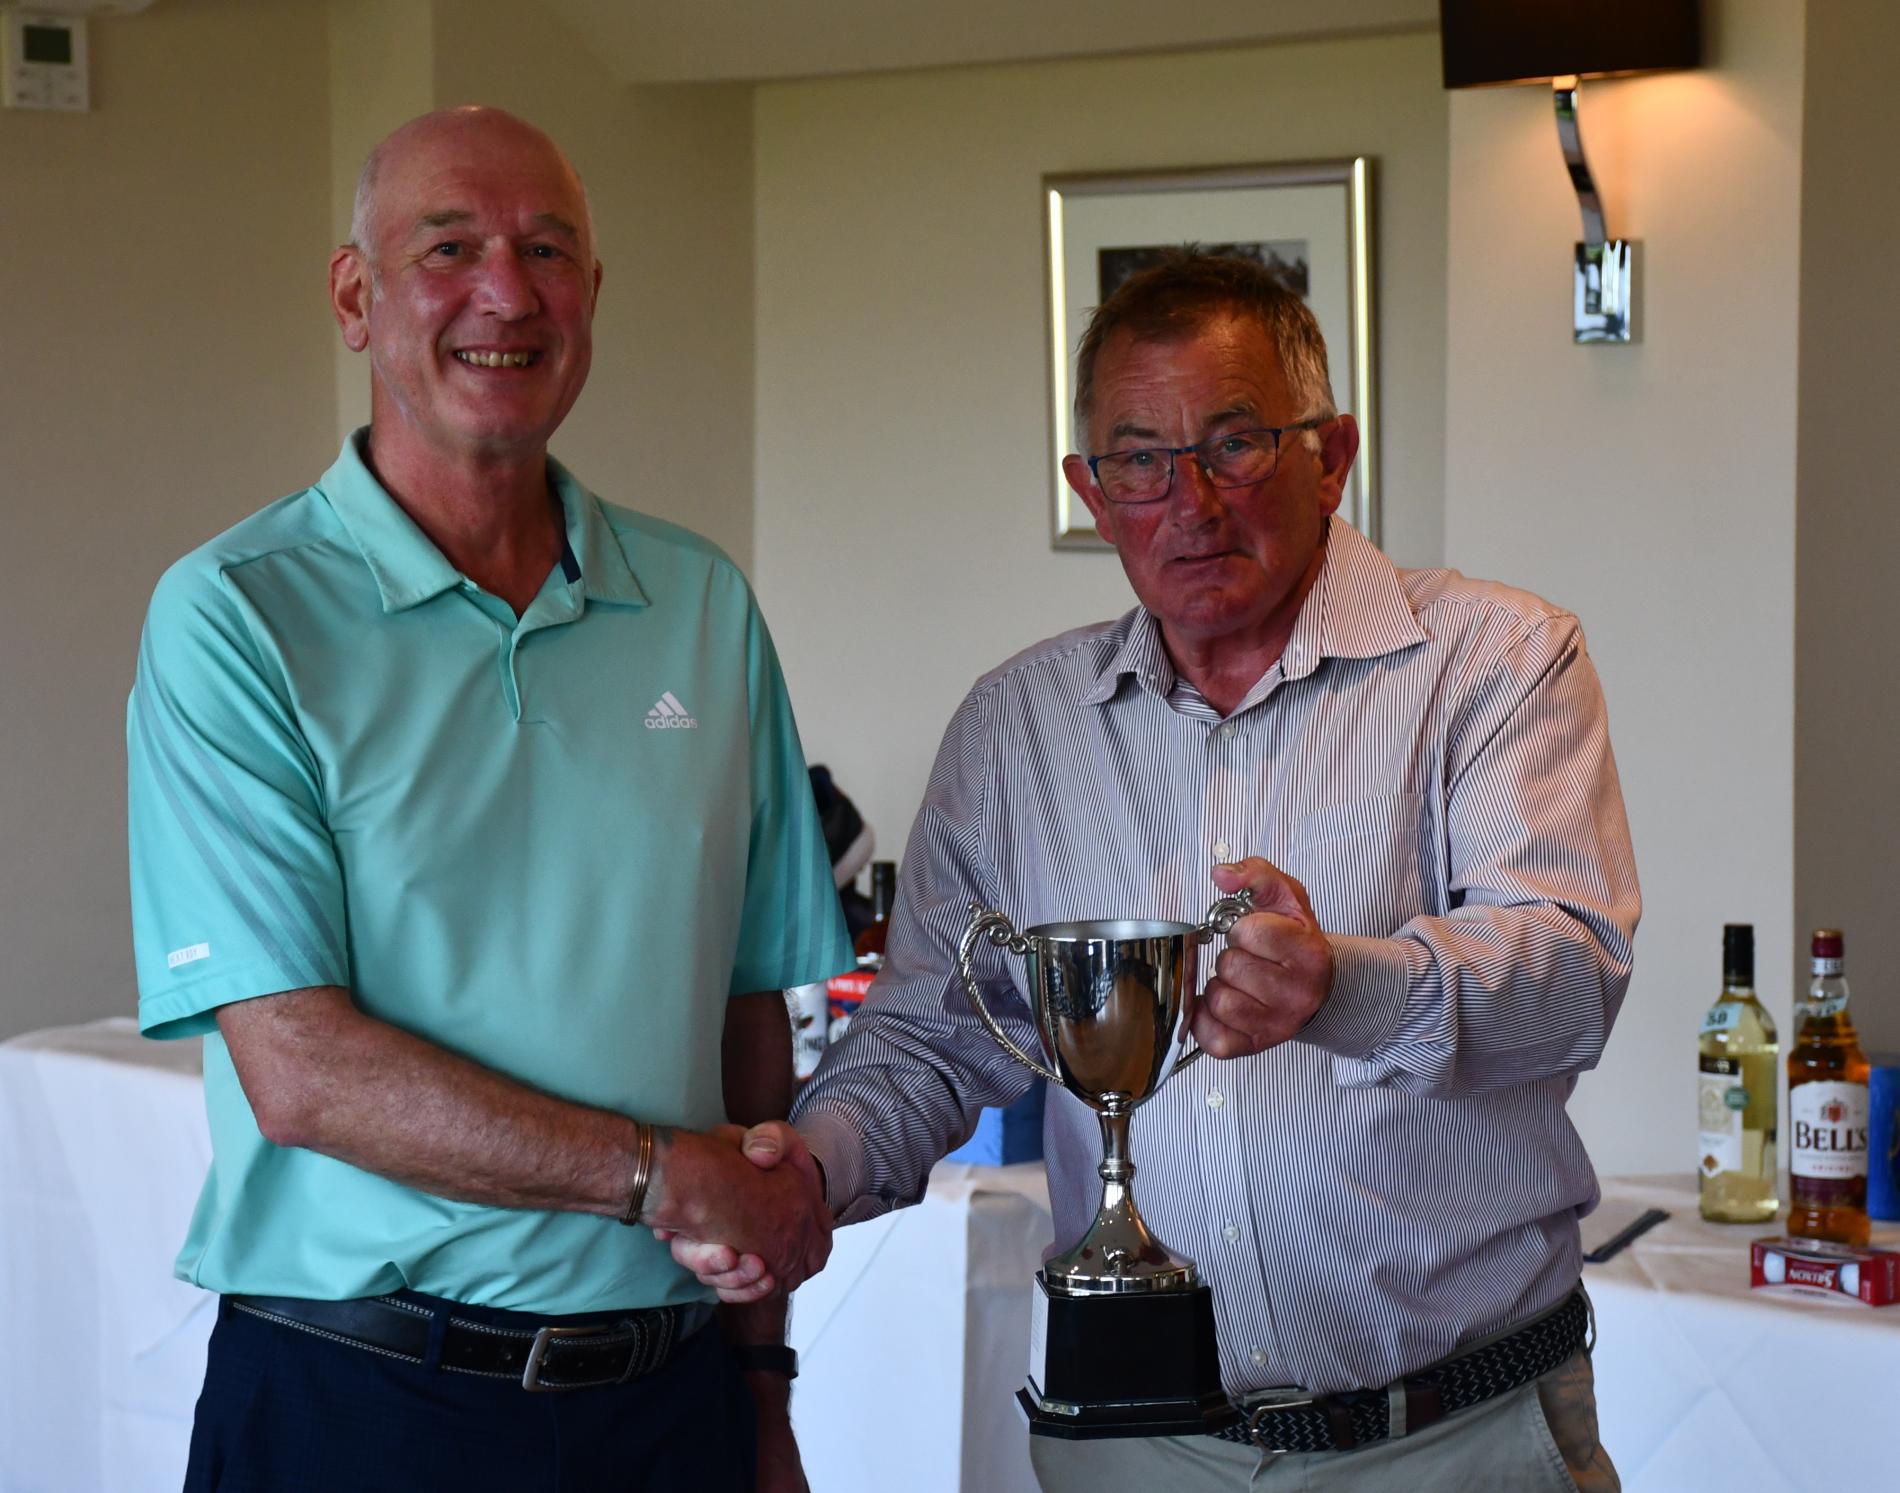 Senior Captains Day winner Tony Humphreys receiving the trophy from Captain Clive Frost